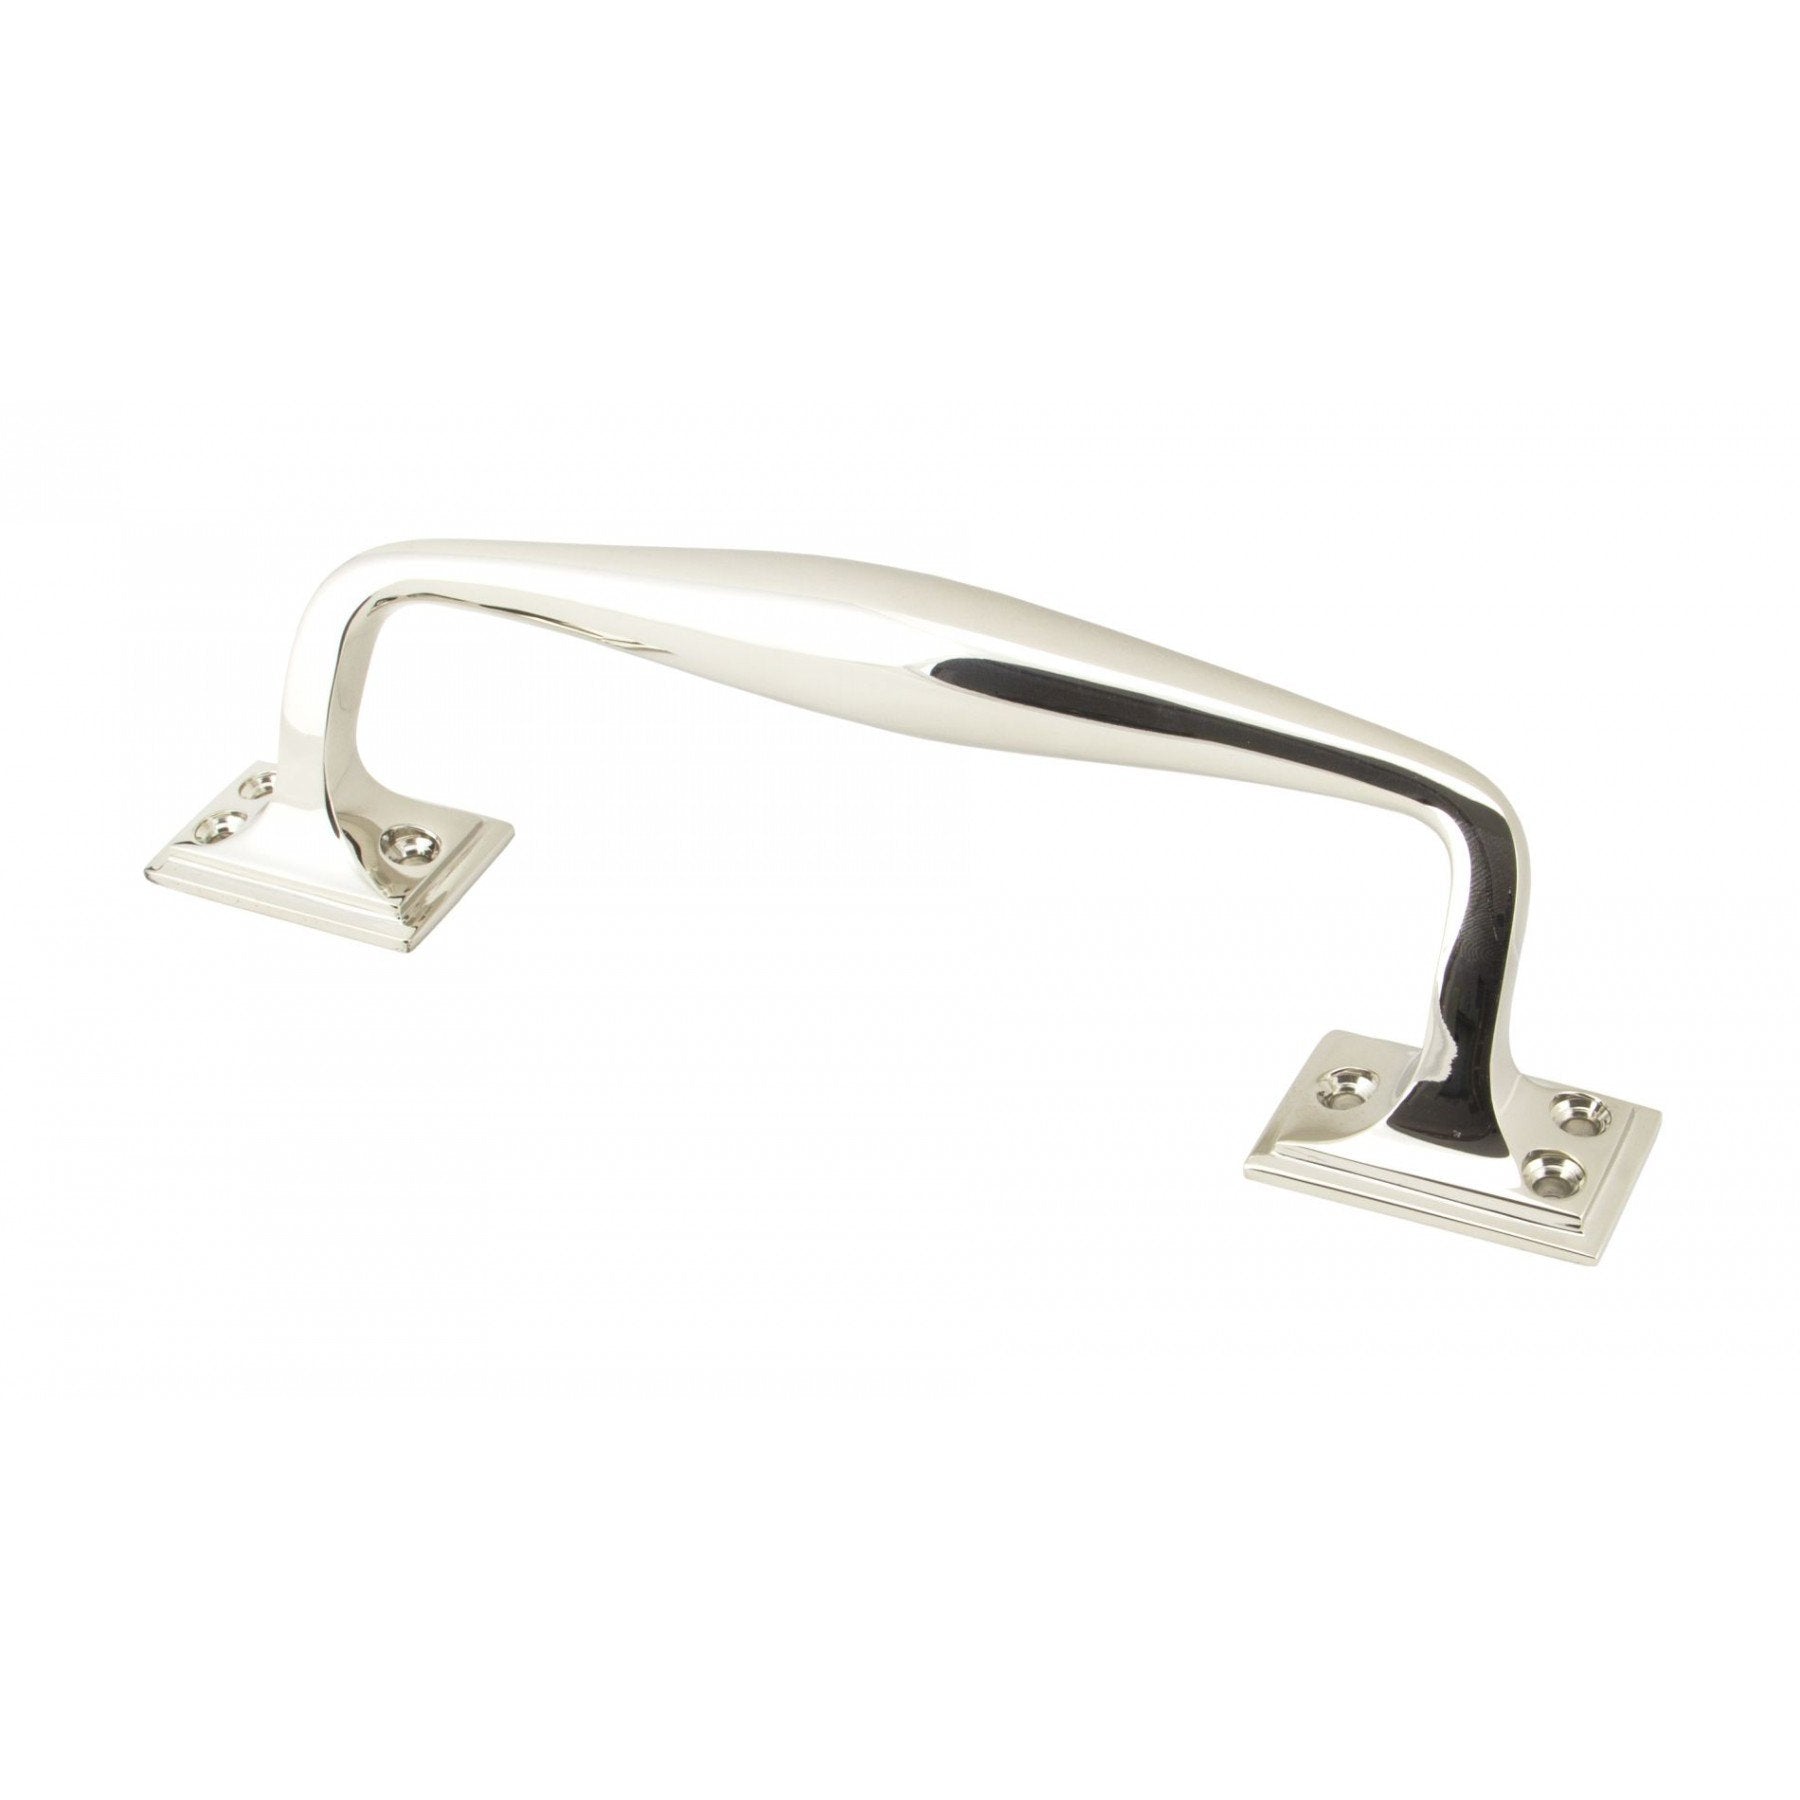 From the Anvil Polished Nickel 230mm Art Deco Pull Handle - No.42 Interiors